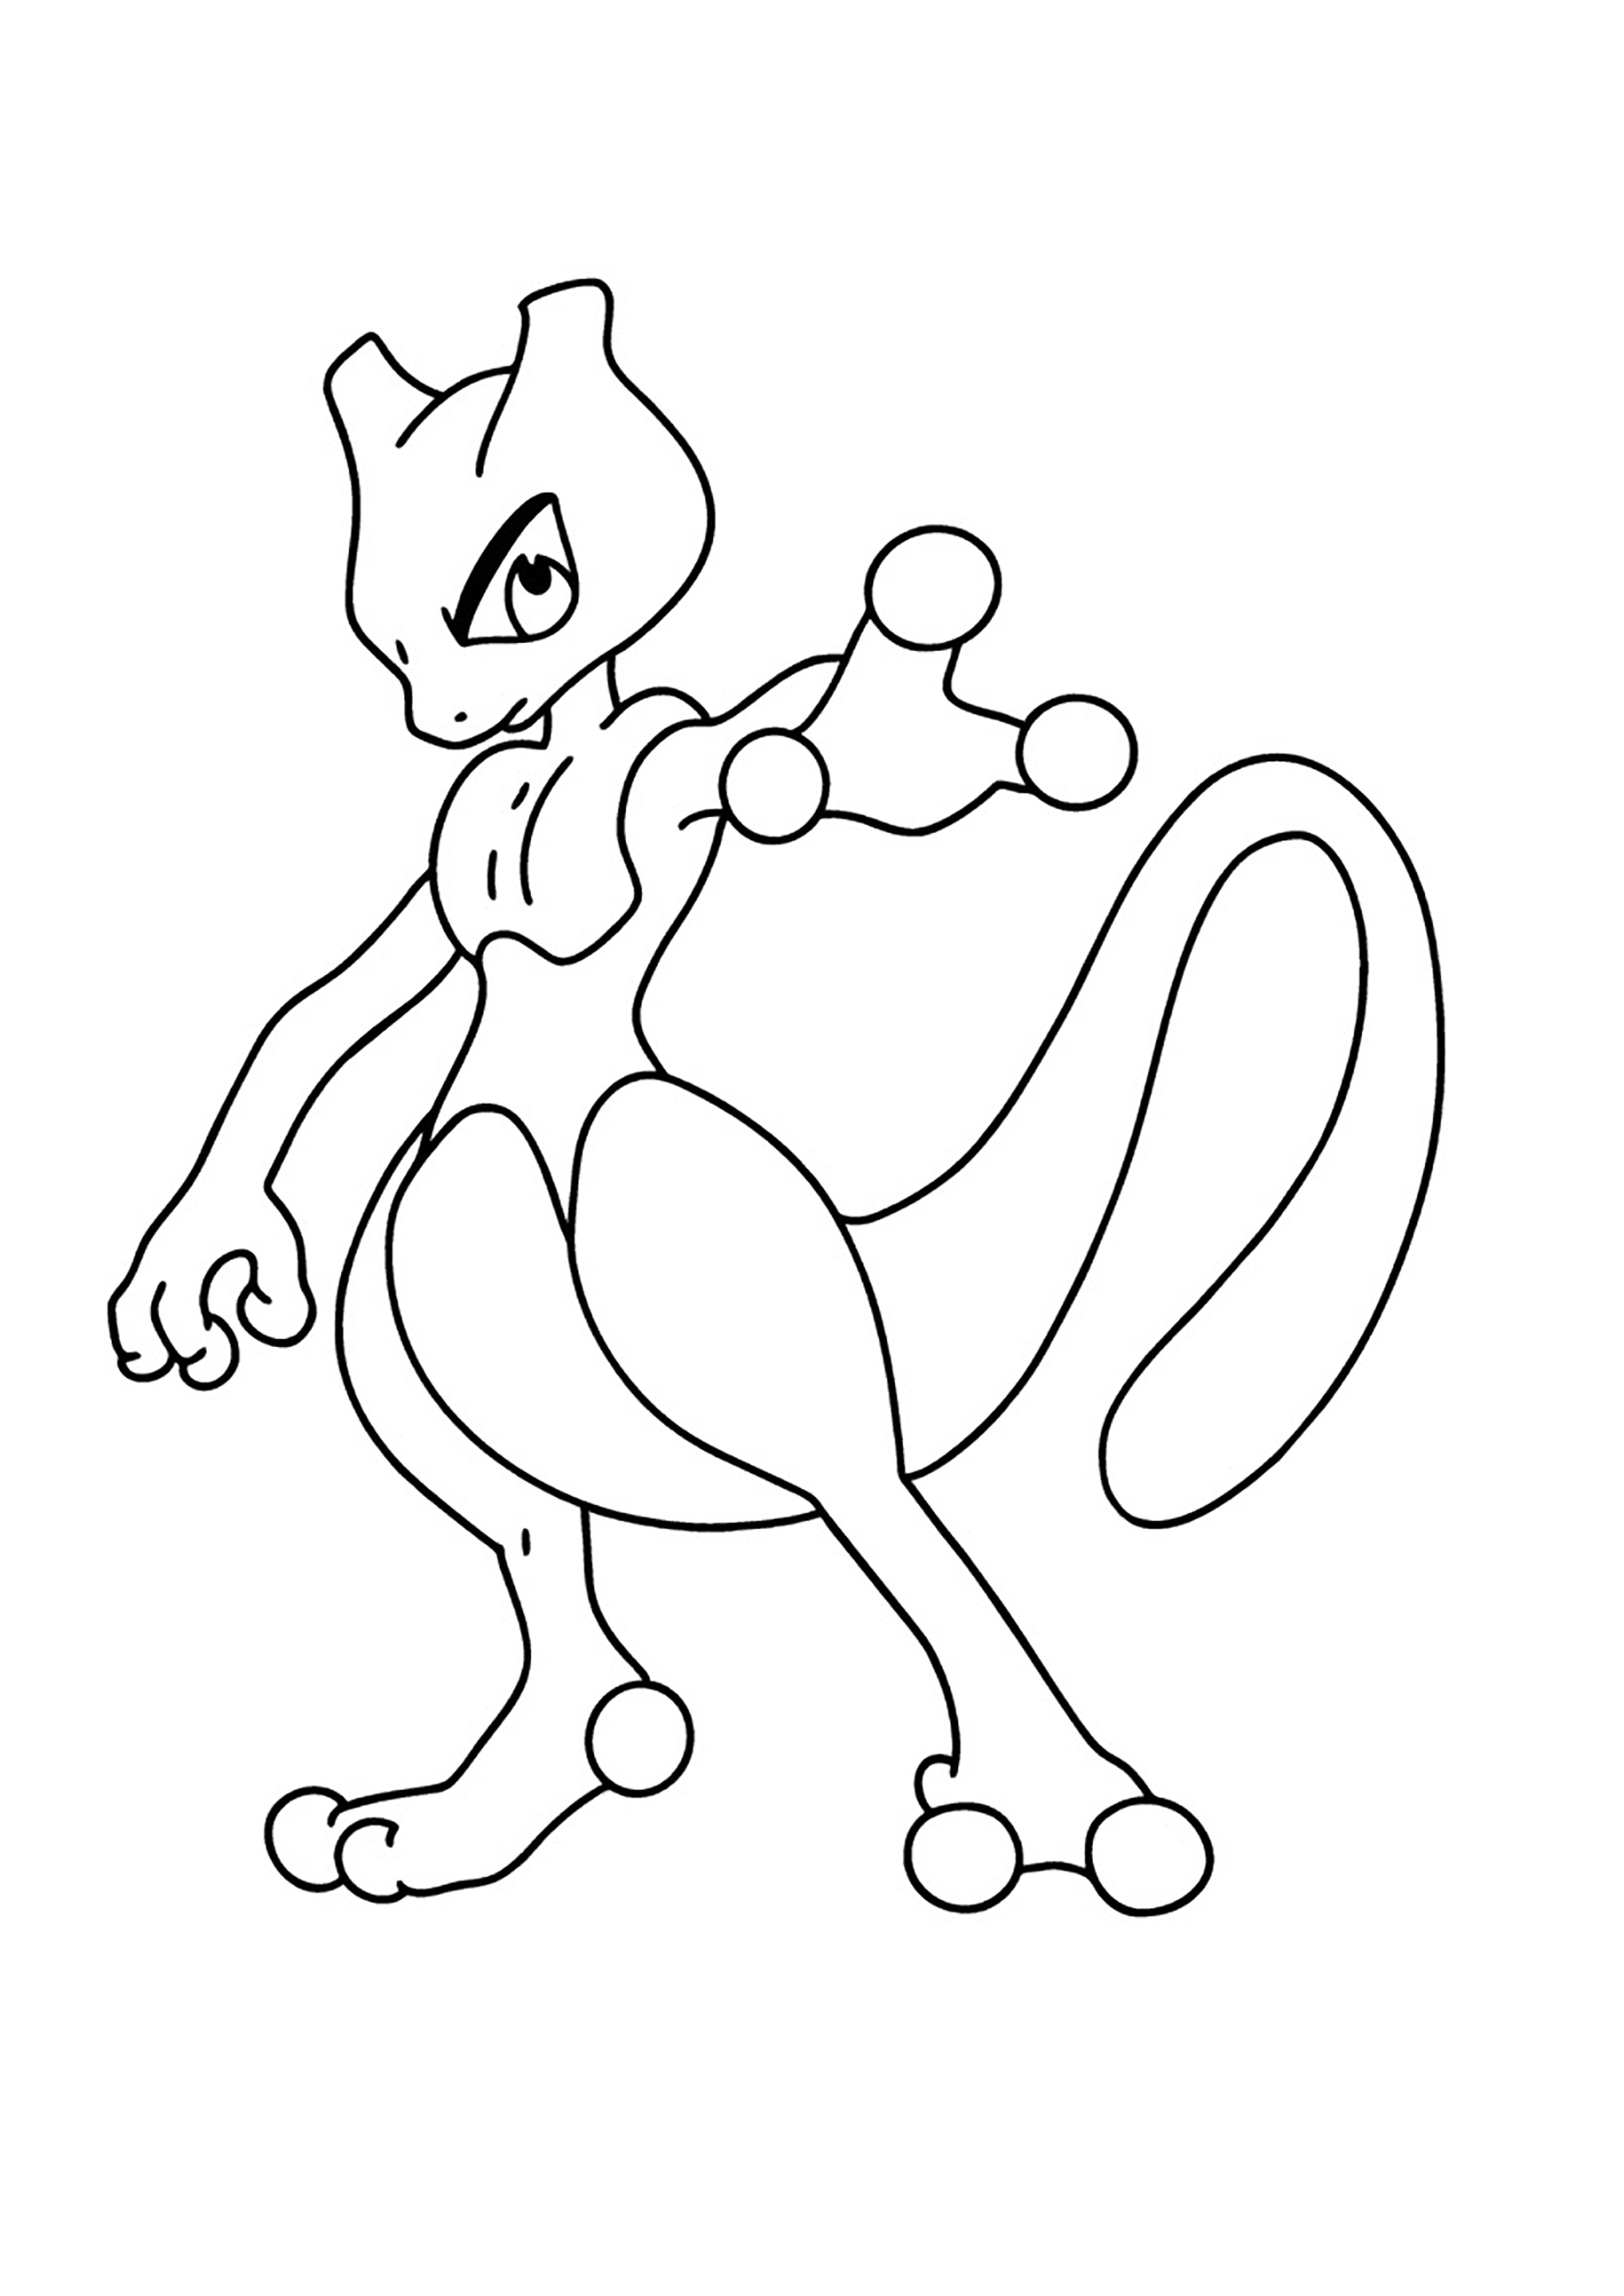 Mewtwo : Easy coloring page